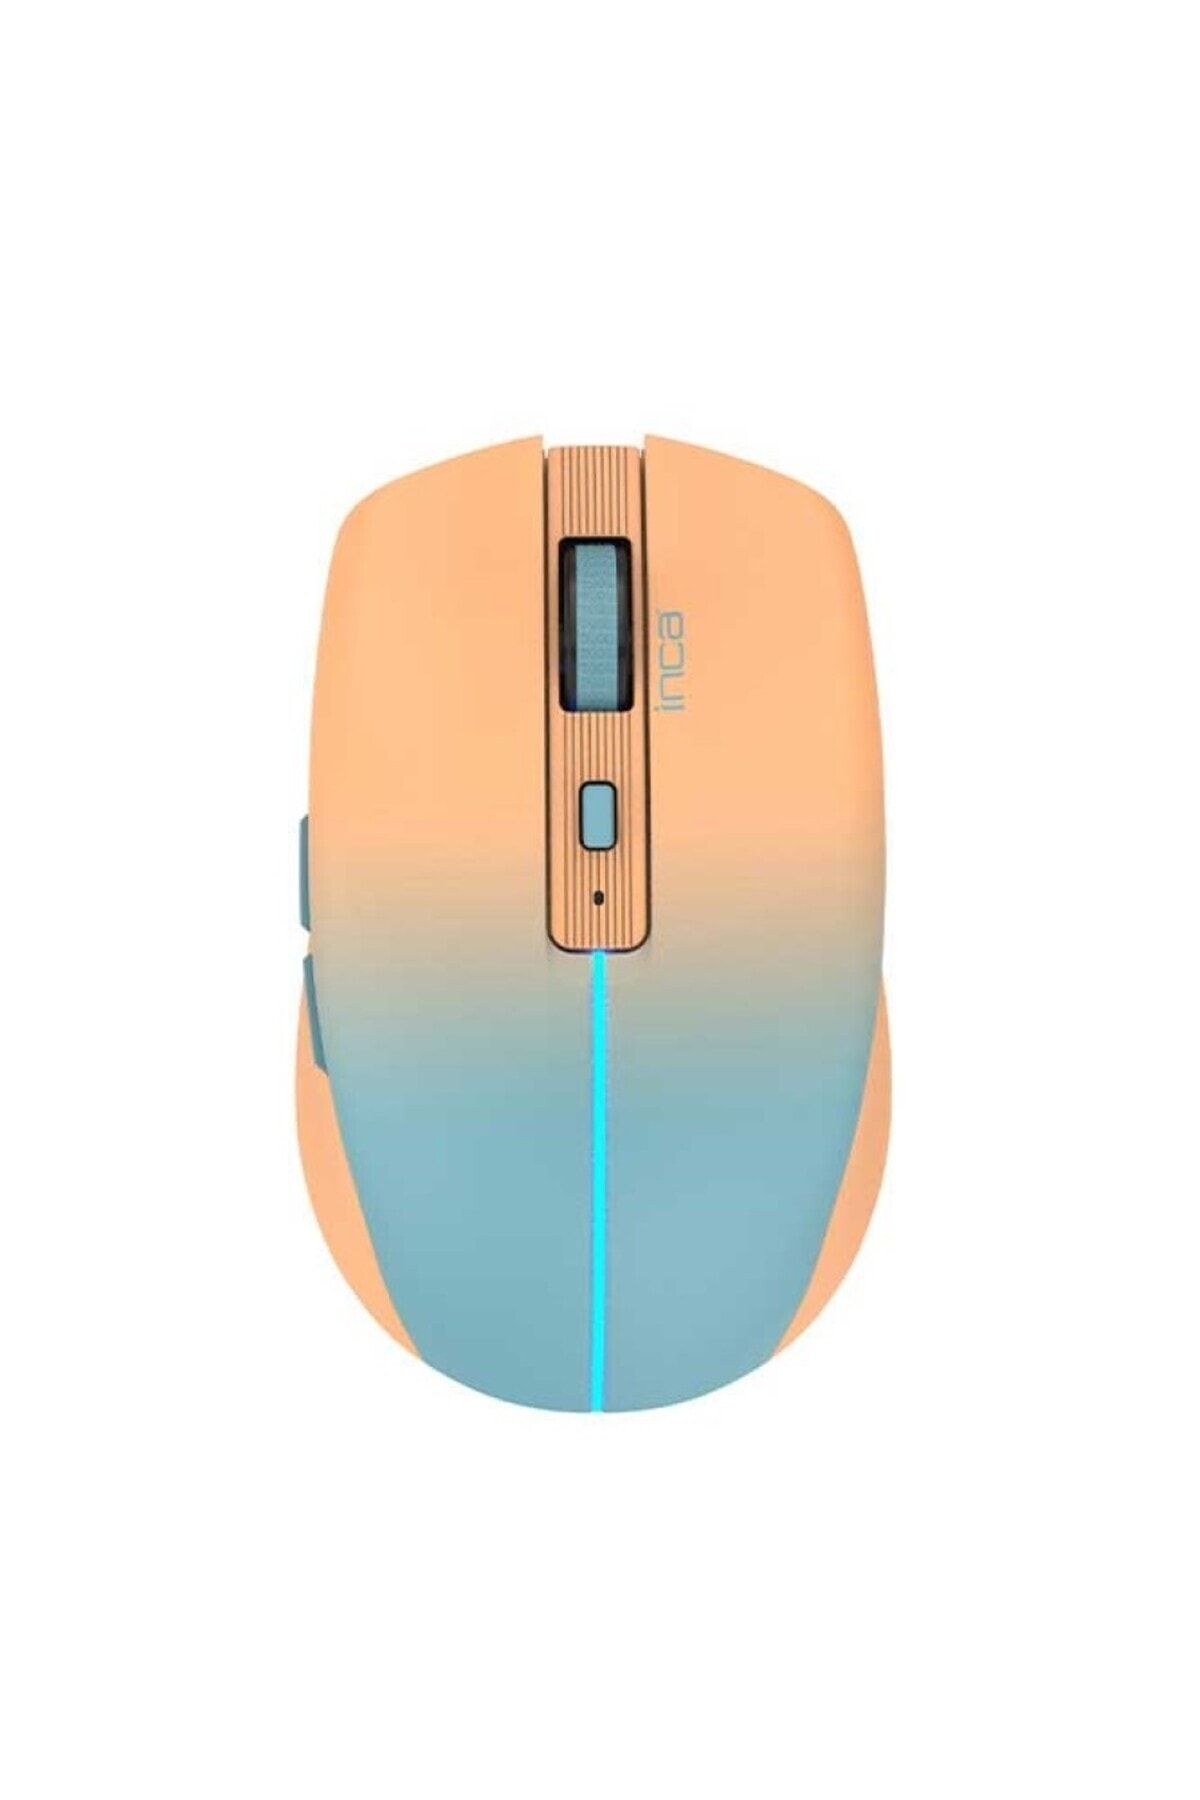 Inca IWM-511RT Dual Mod Bluetooth+Wireless Rechargeable Gradient Color Silent Mouse